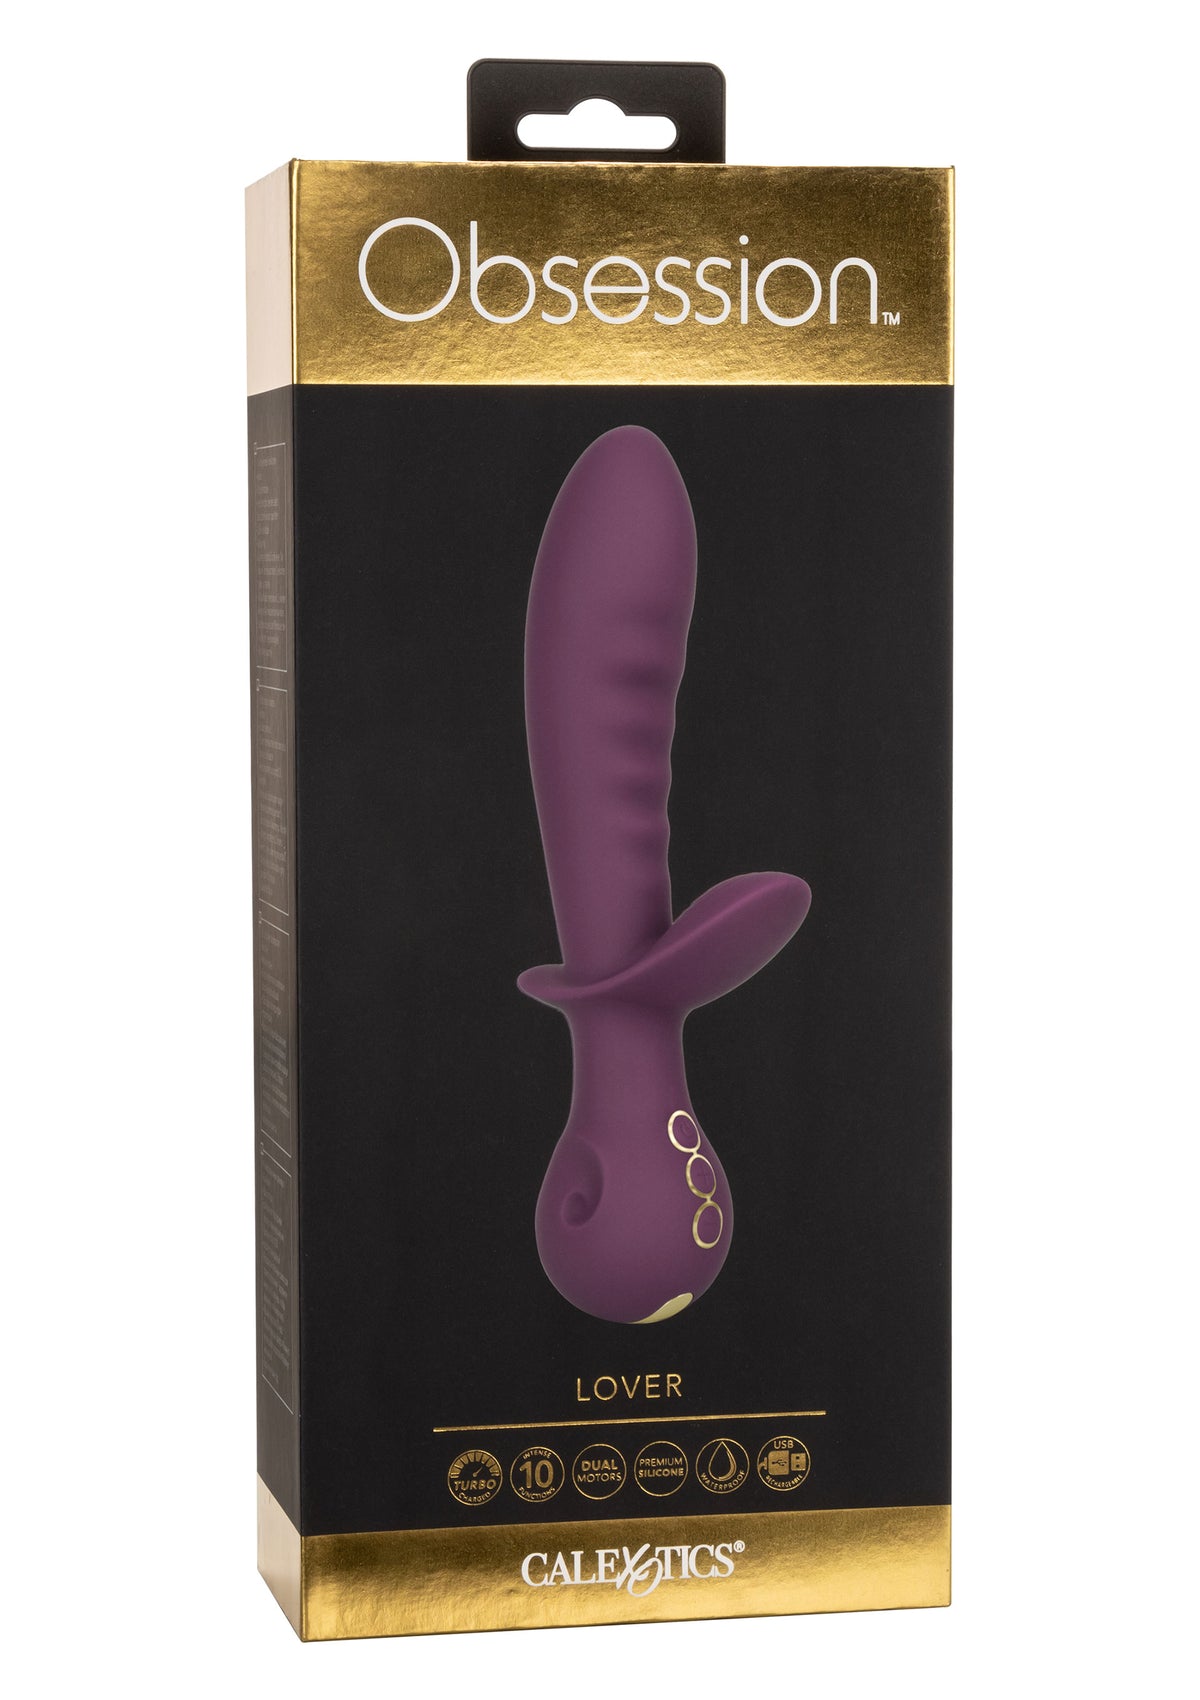 Obsession Lover